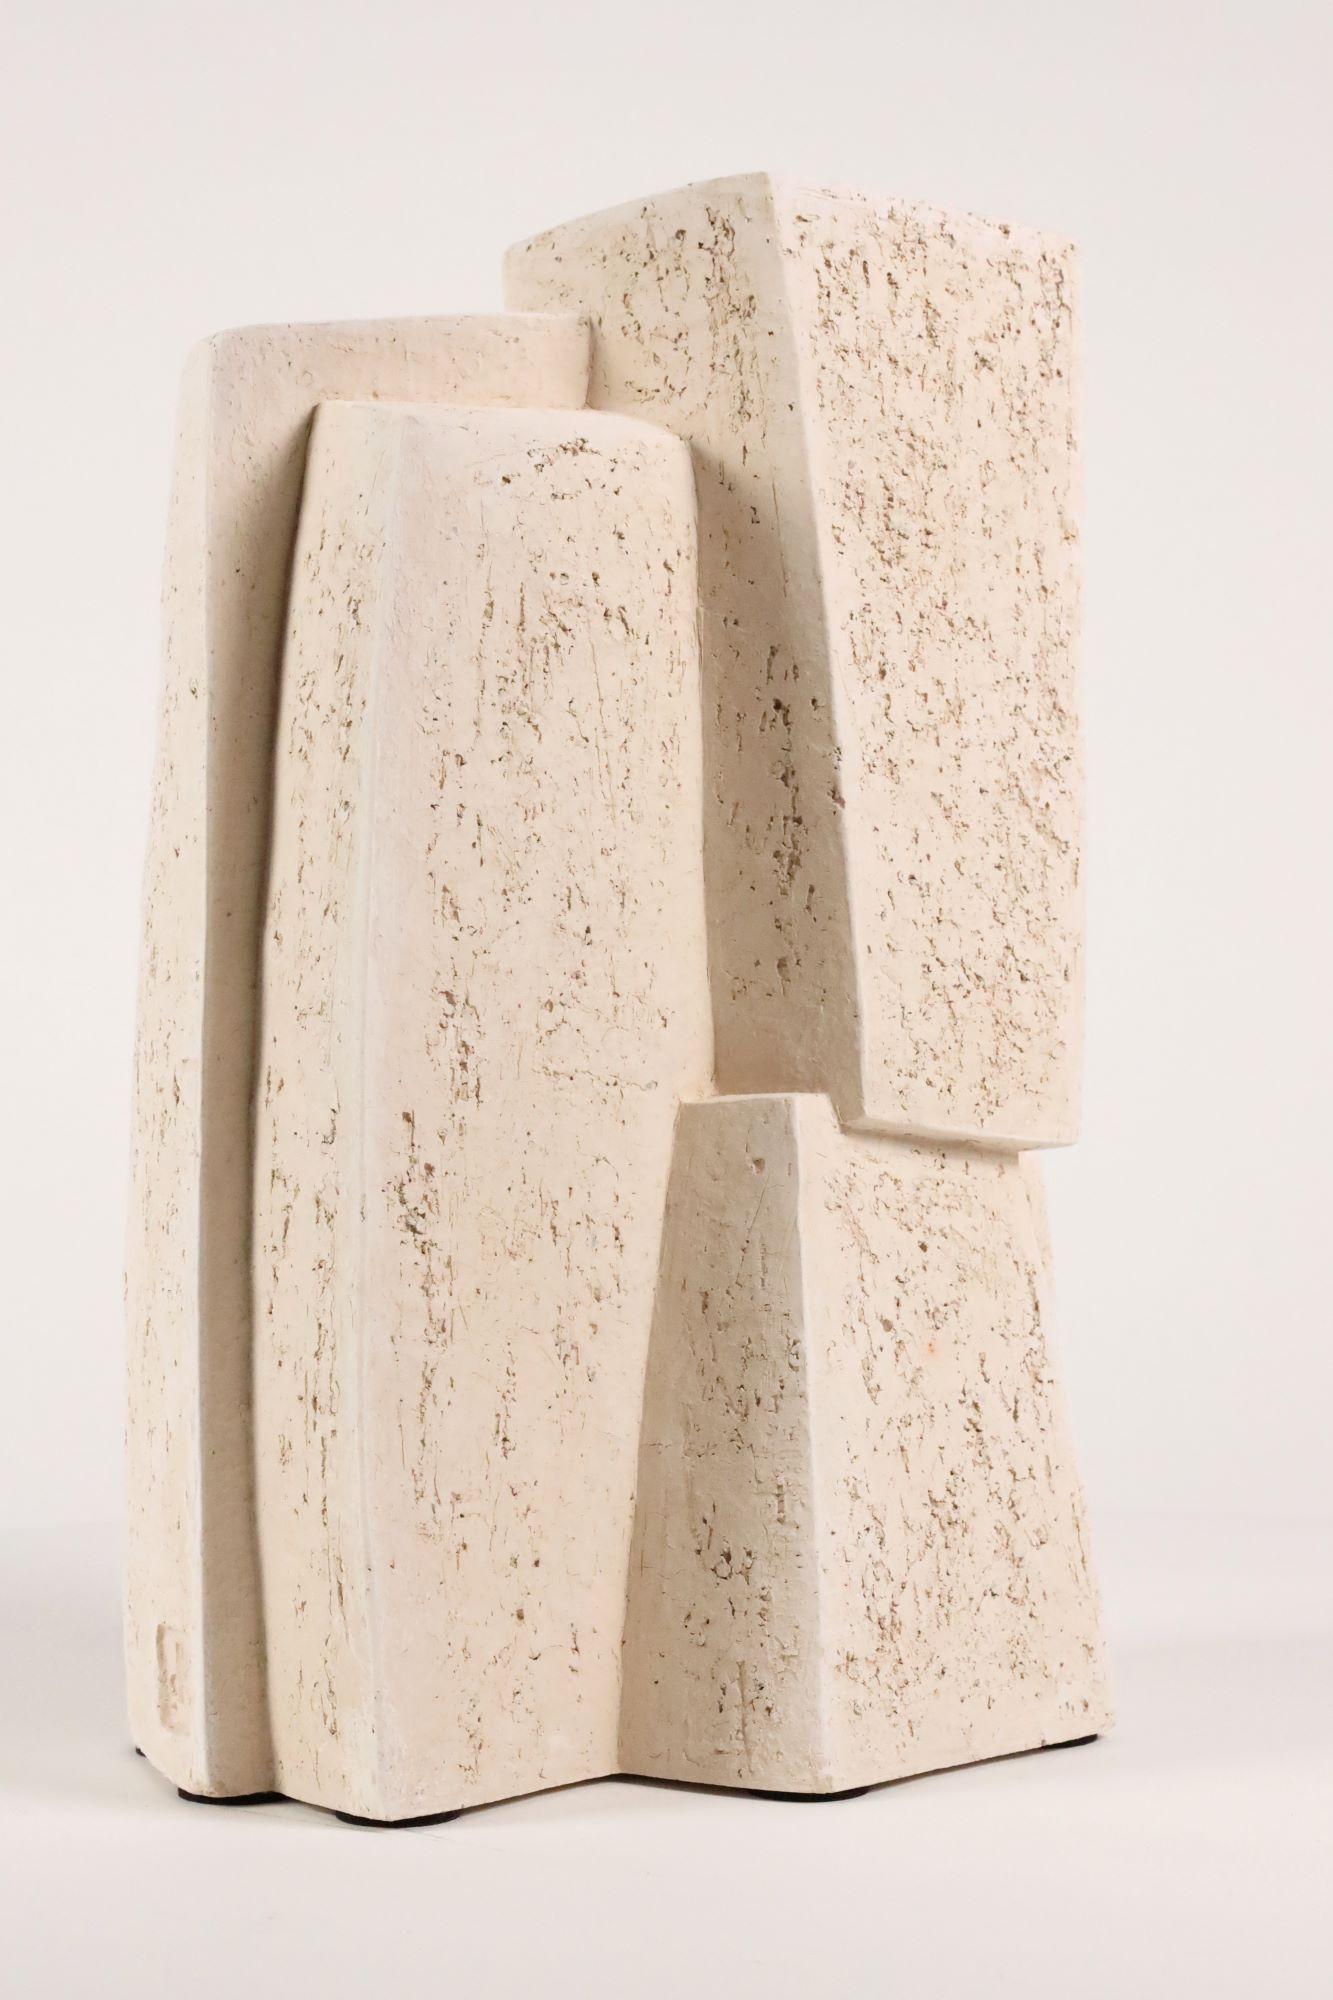 Union V by Delphine Brabant - Abstract geometric sculpture, terracotta, white For Sale 2